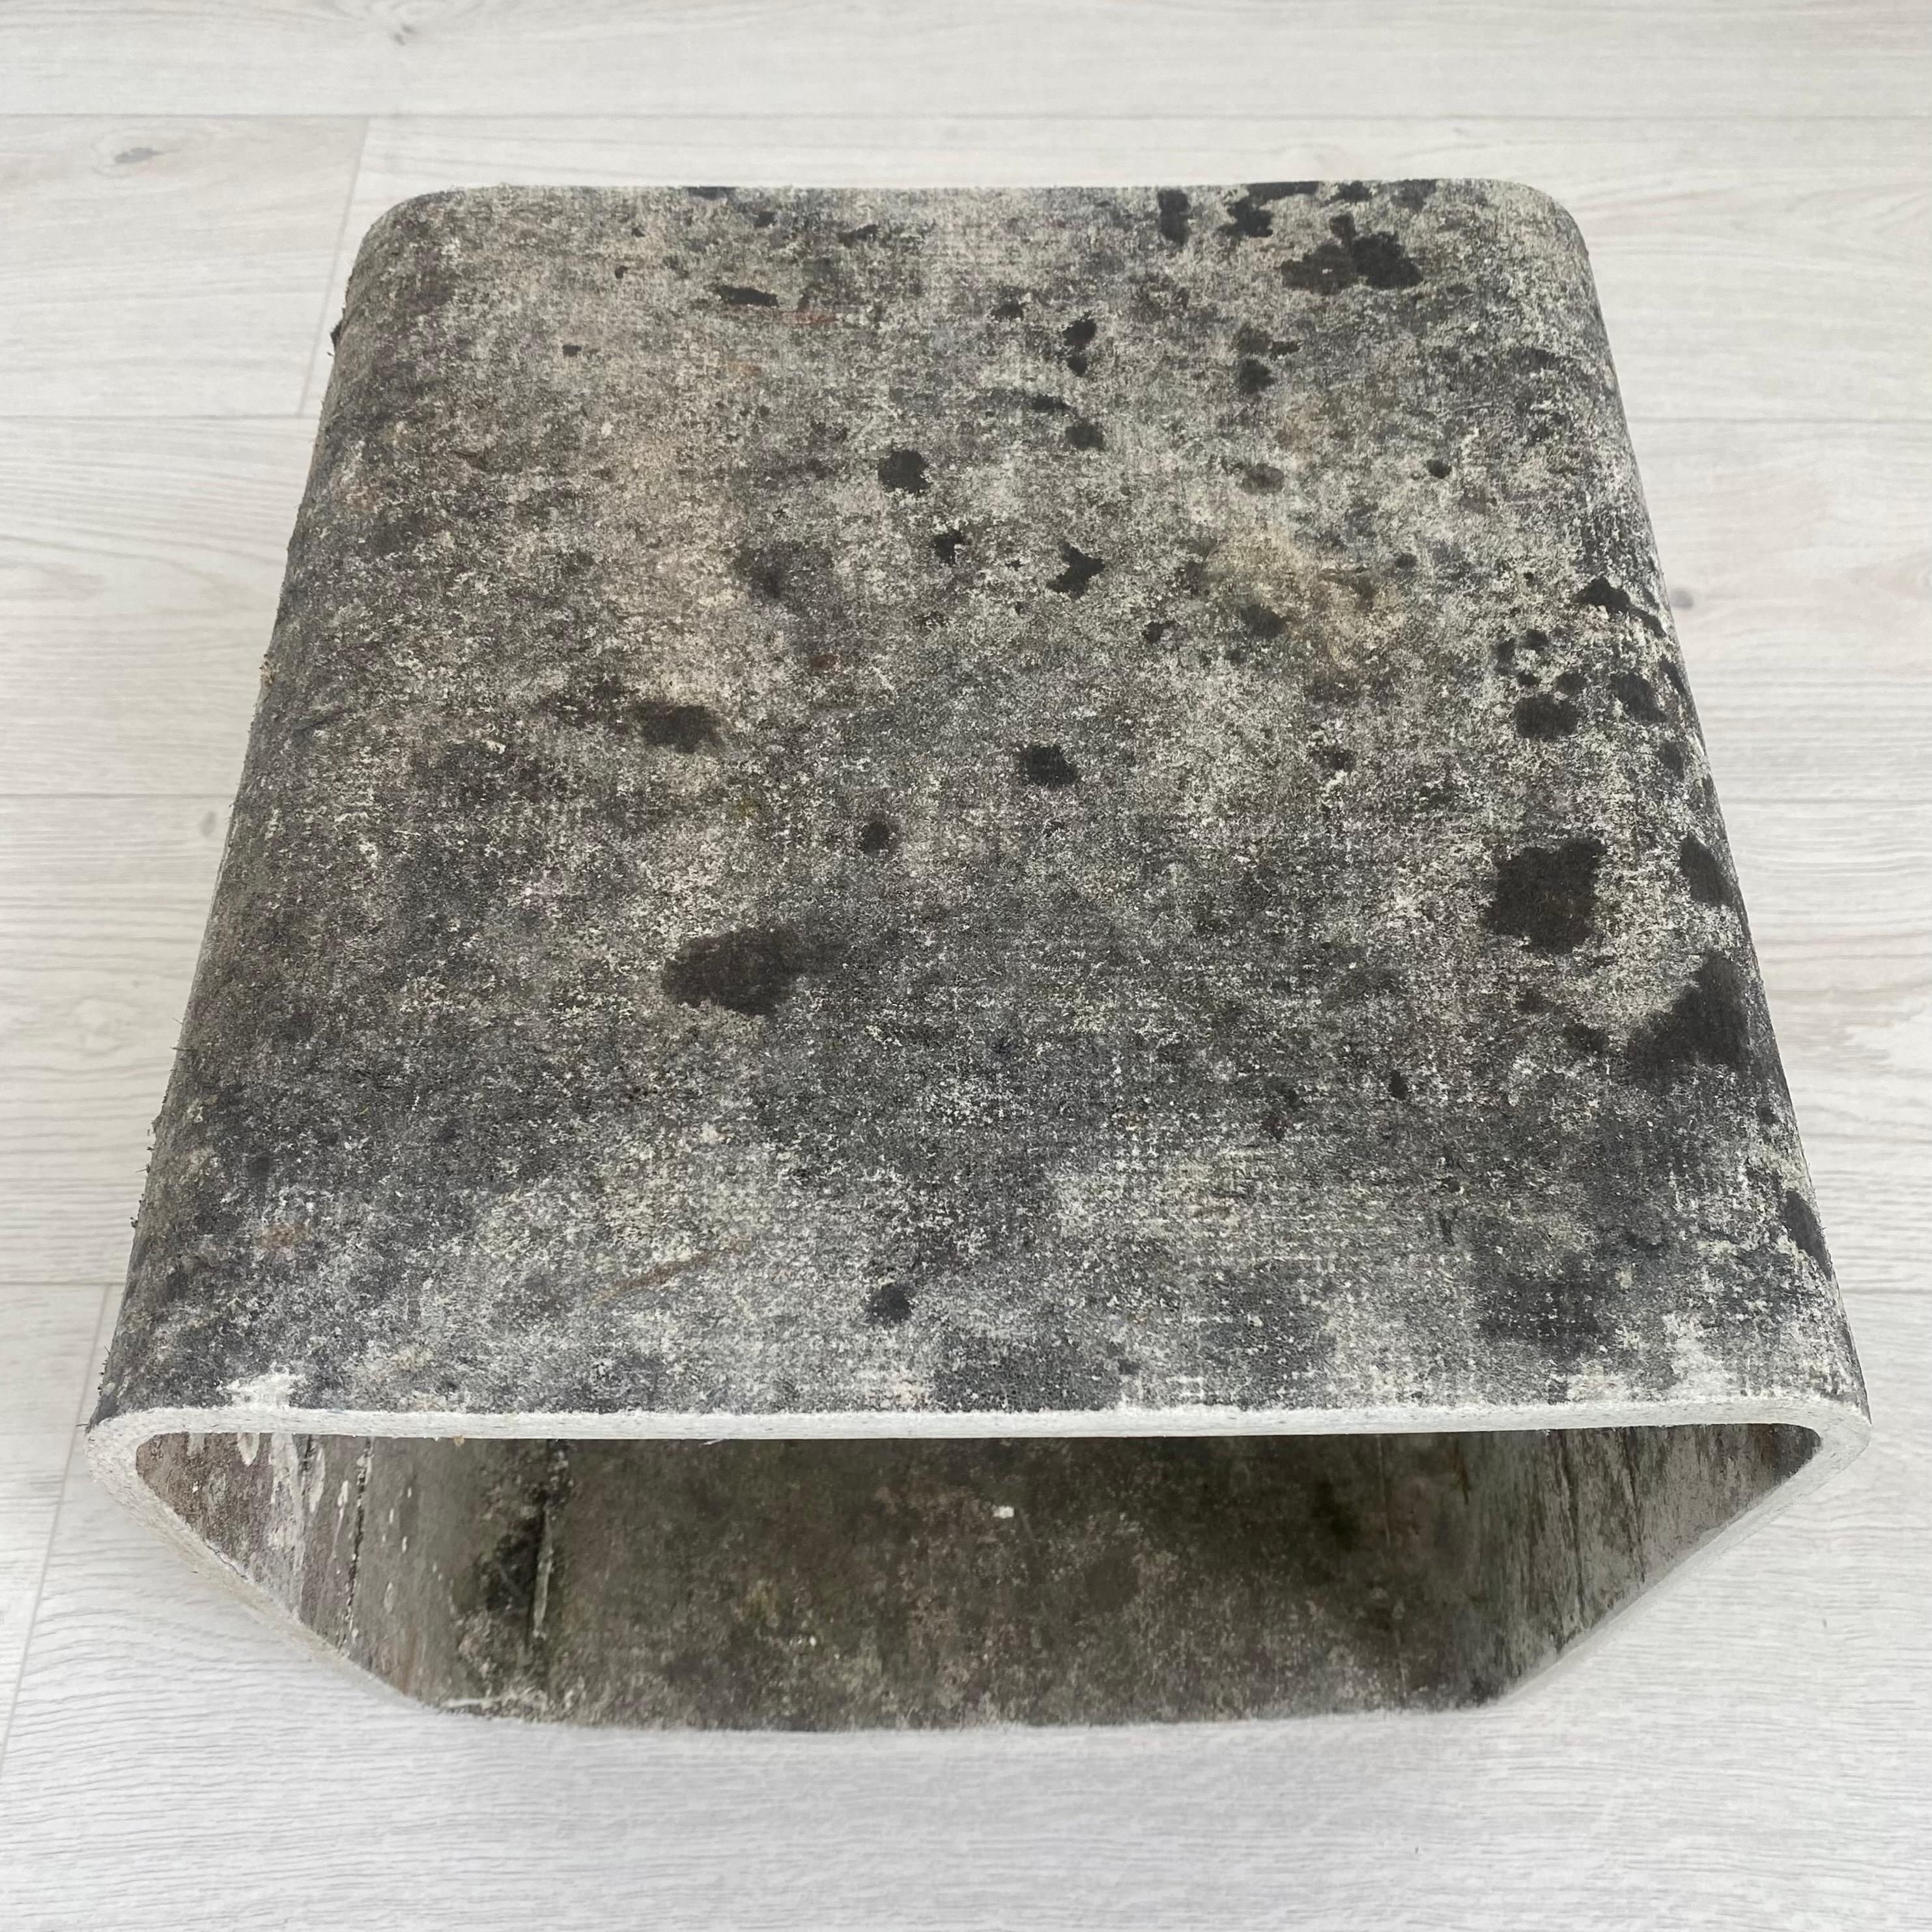 Willy Guhl Concrete Cube Side Table, 1960s Switzerland  For Sale 3